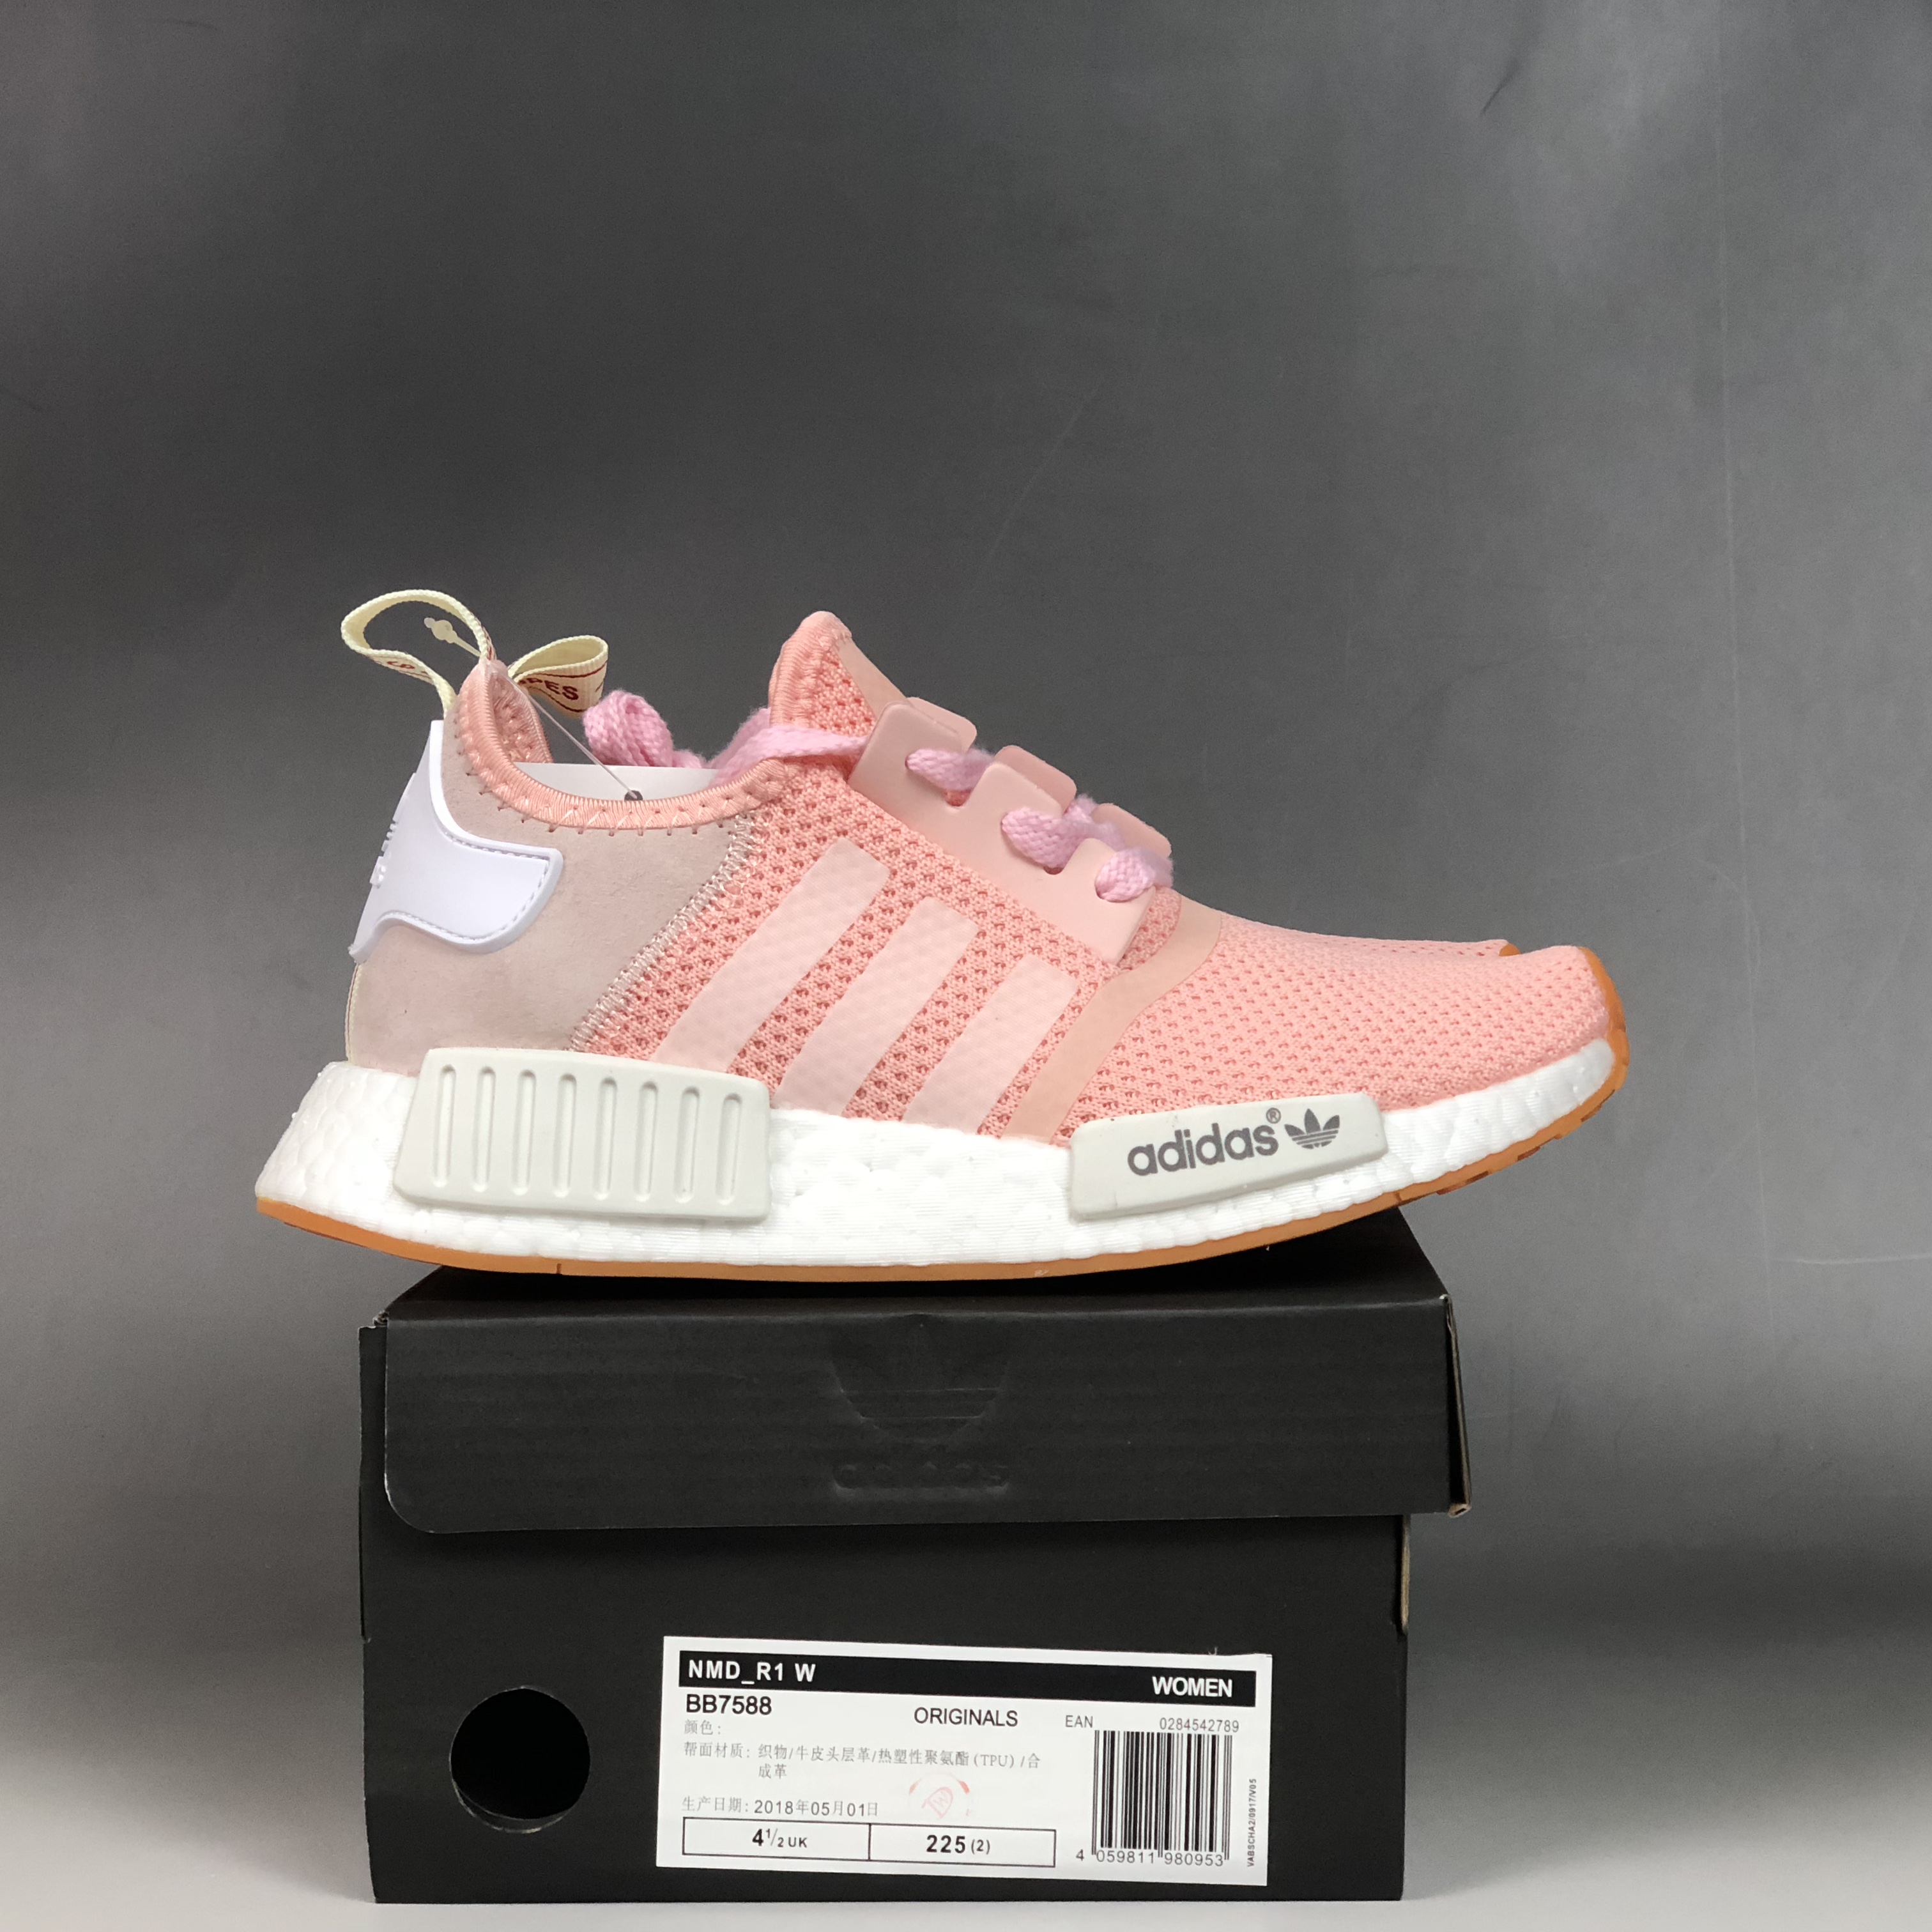 adidas NMD R1 W Pink/White/Gum For Sale – The Sole Line